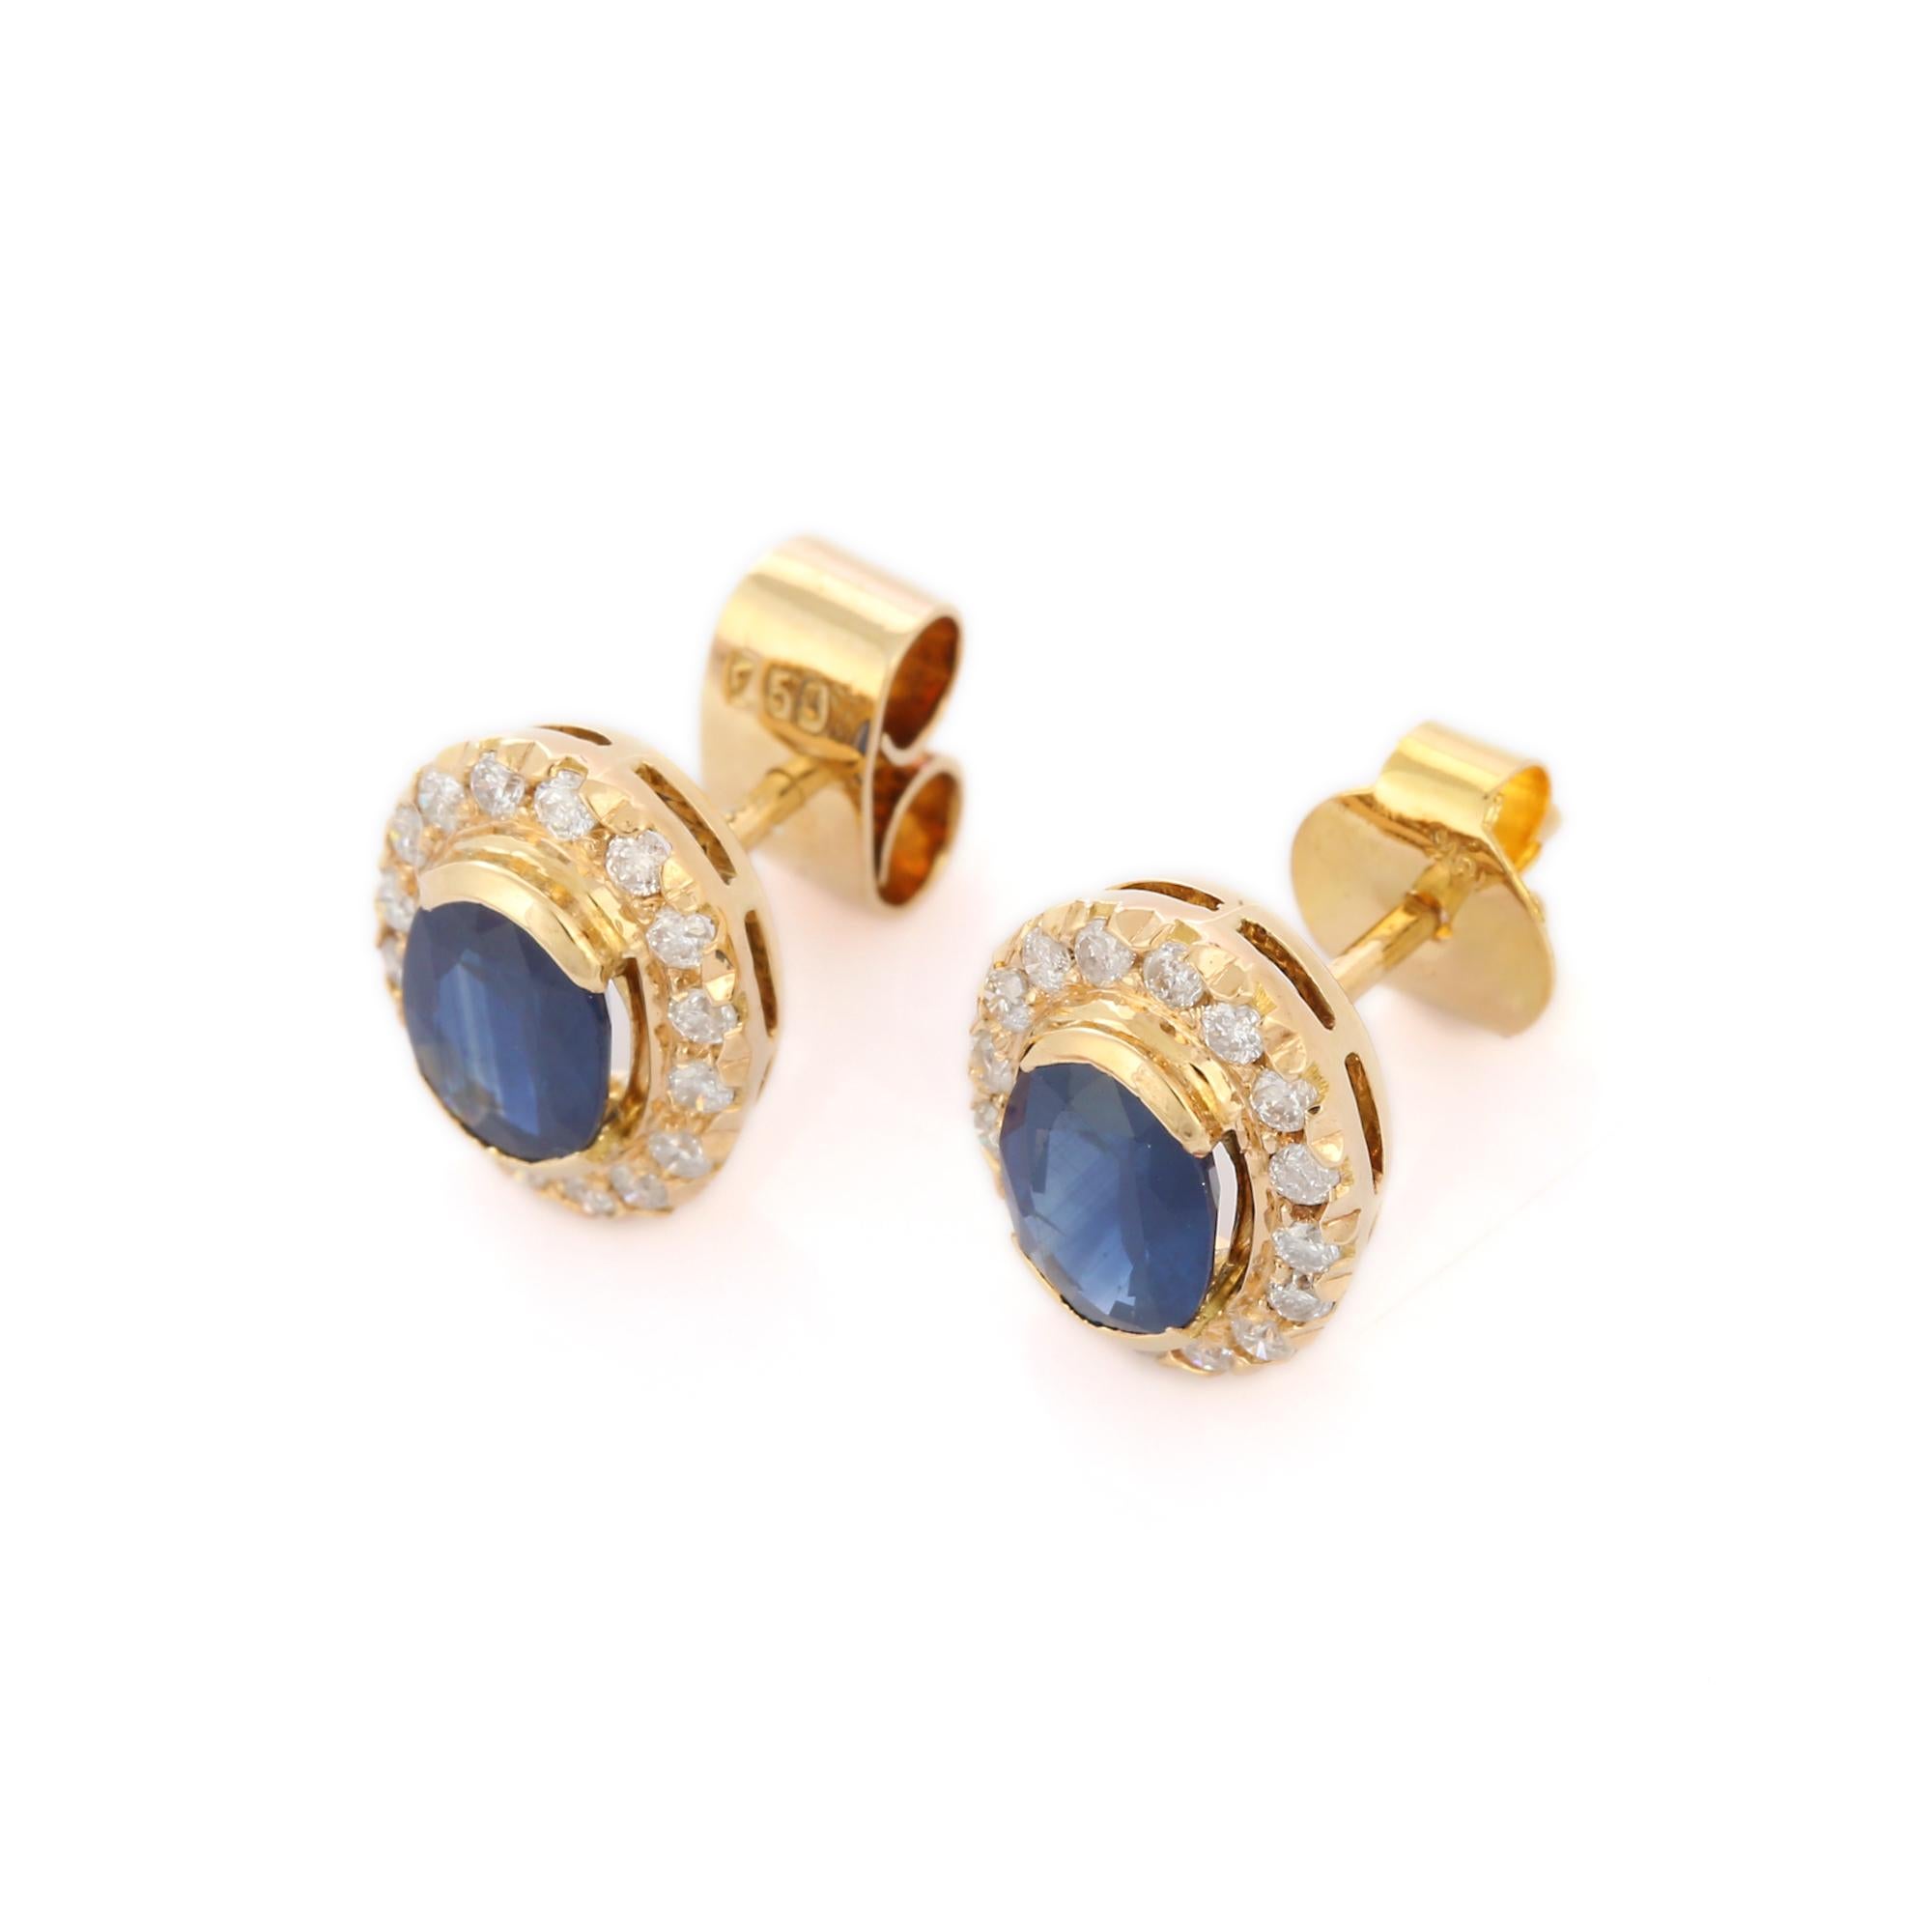 Studs create a subtle beauty while showcasing the colors of the natural precious gemstones and illuminating diamonds making a statement.

Oval cut blue sapphire studs in 18K gold. Embrace your look with these stunning pair of earrings suitable for